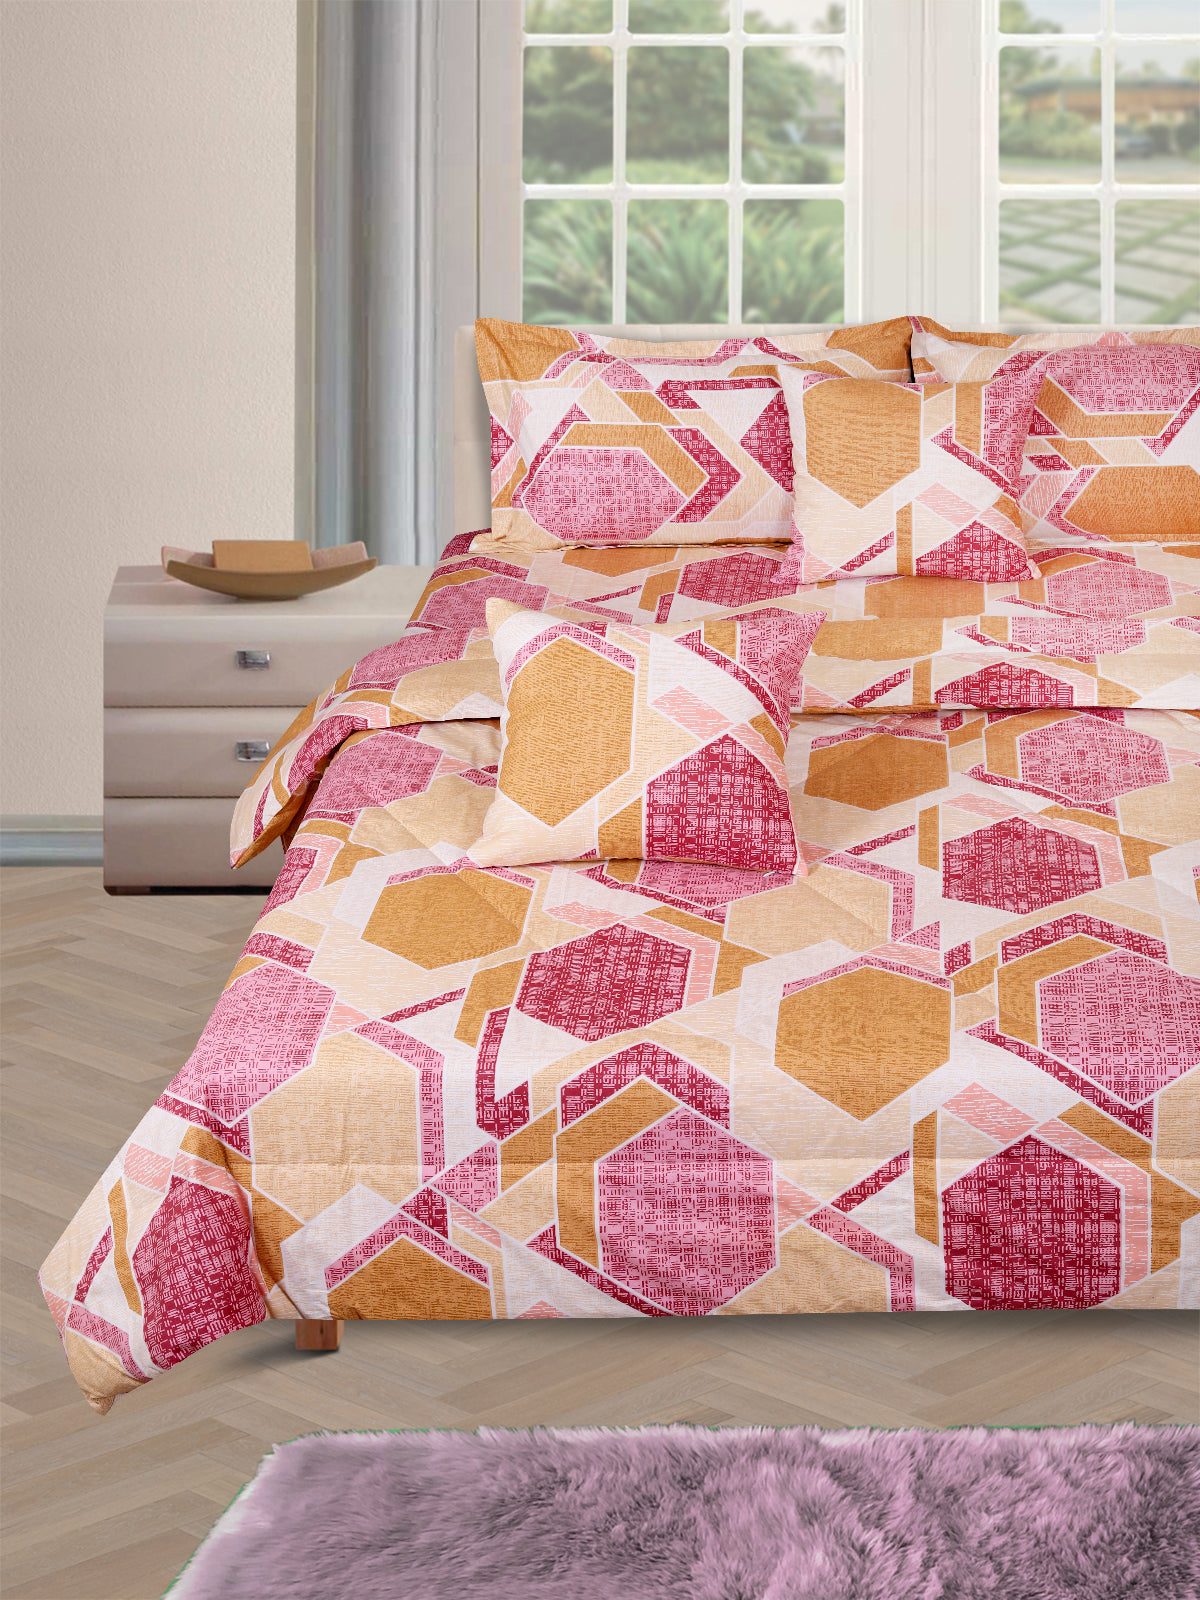 Beige & Pink Geometric Printed Cotton Double Queen Bedding Set With Pillow Cover